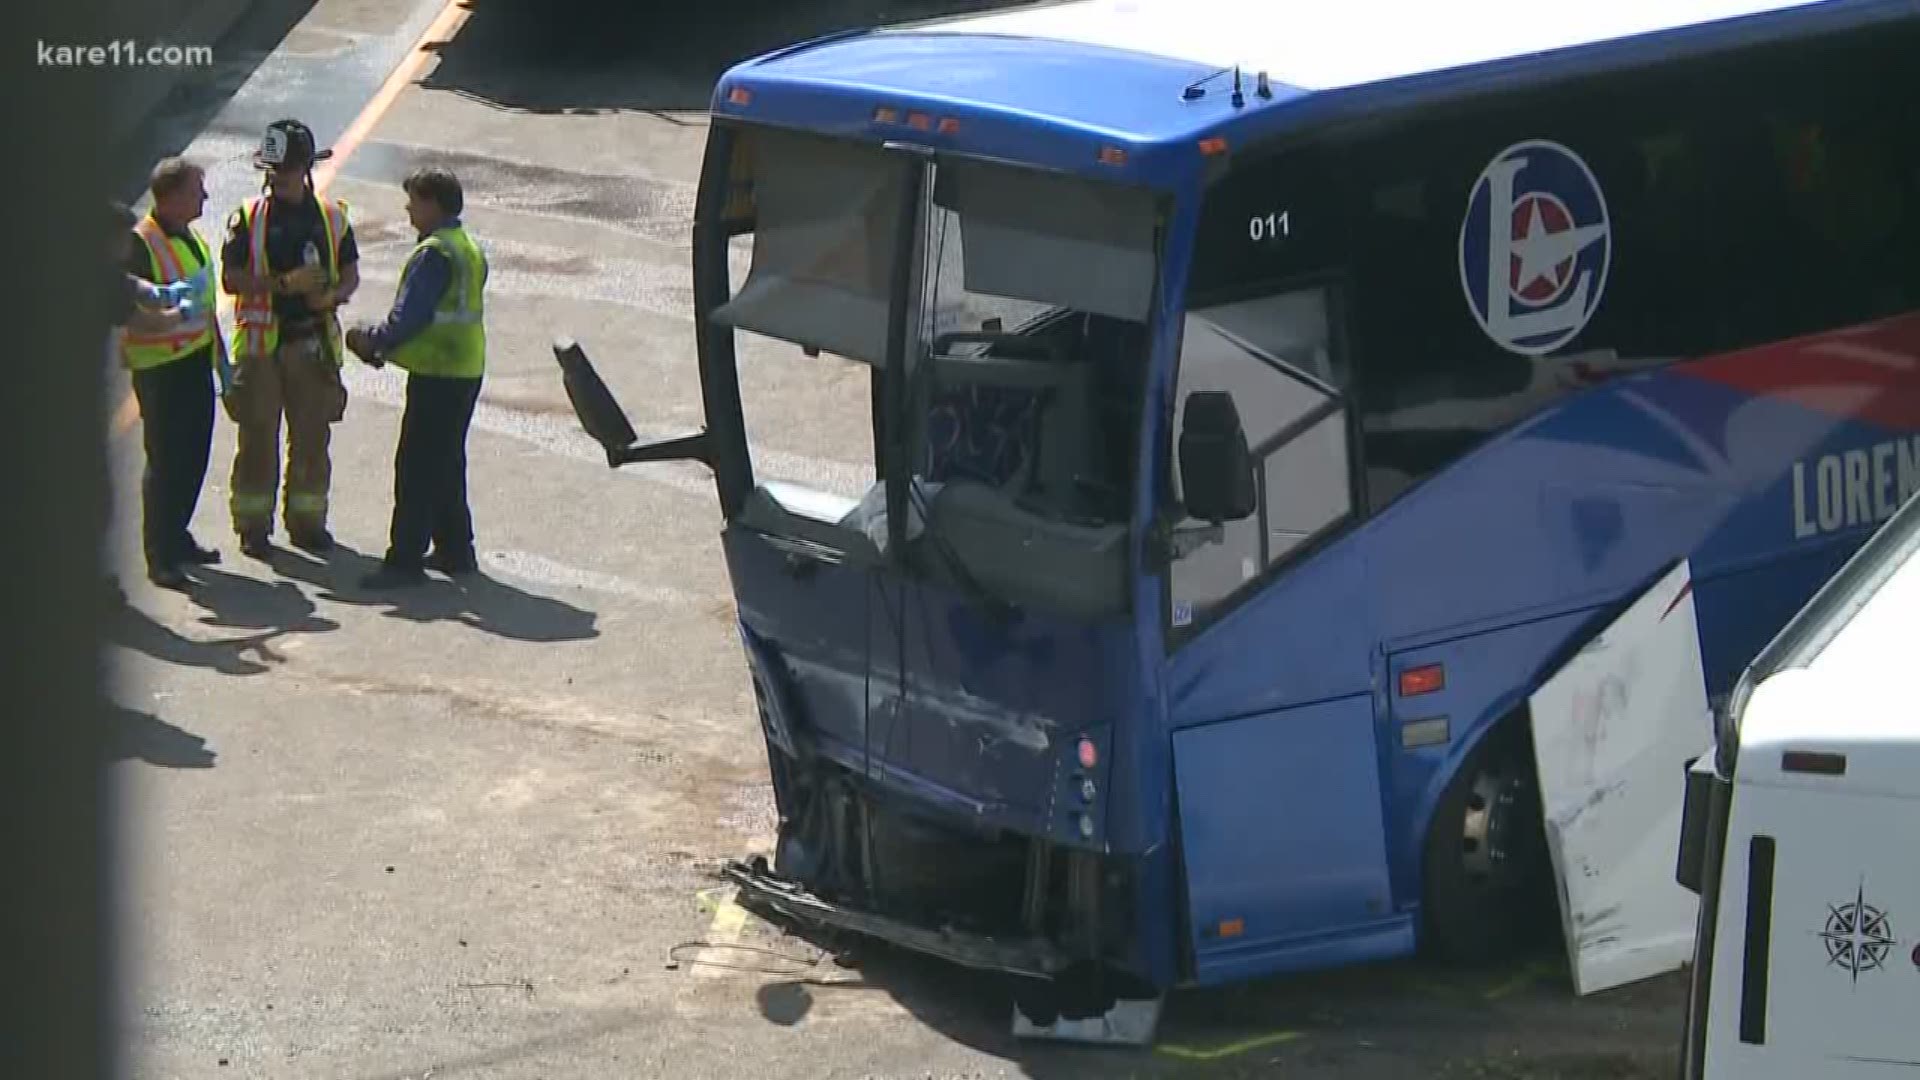 Eight people were taken to the hospital after two tour buses collided near Larpenteur Avenue.